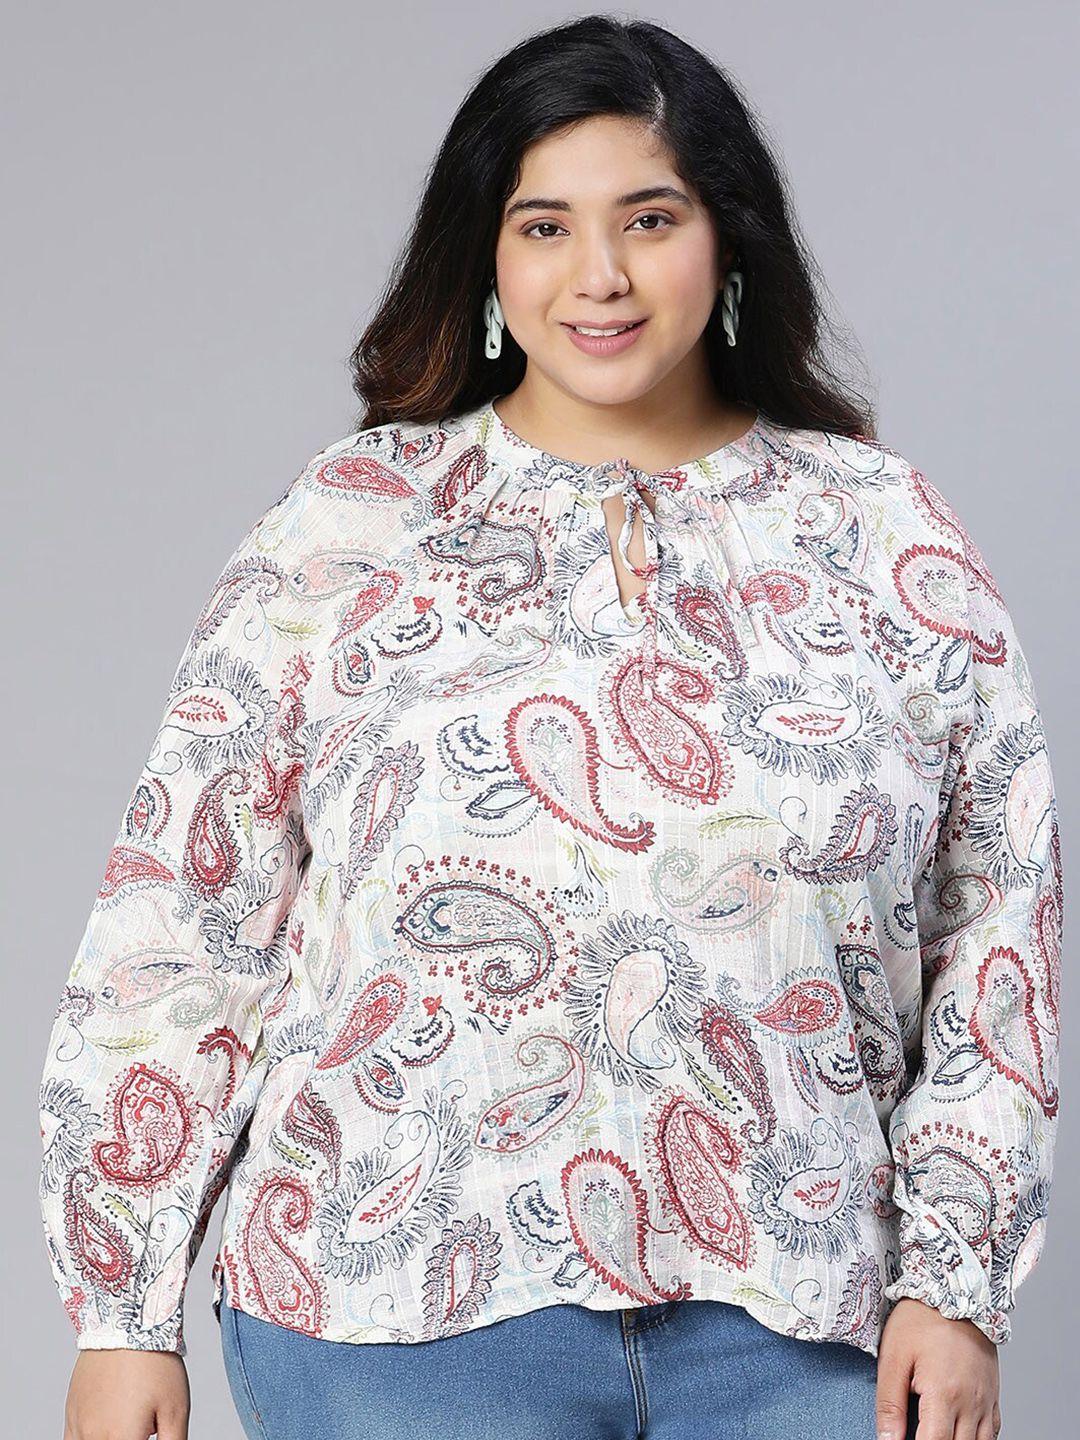 oxolloxo-plus-size-ethnic-motif-printed-cotton-tie-up-neck-top